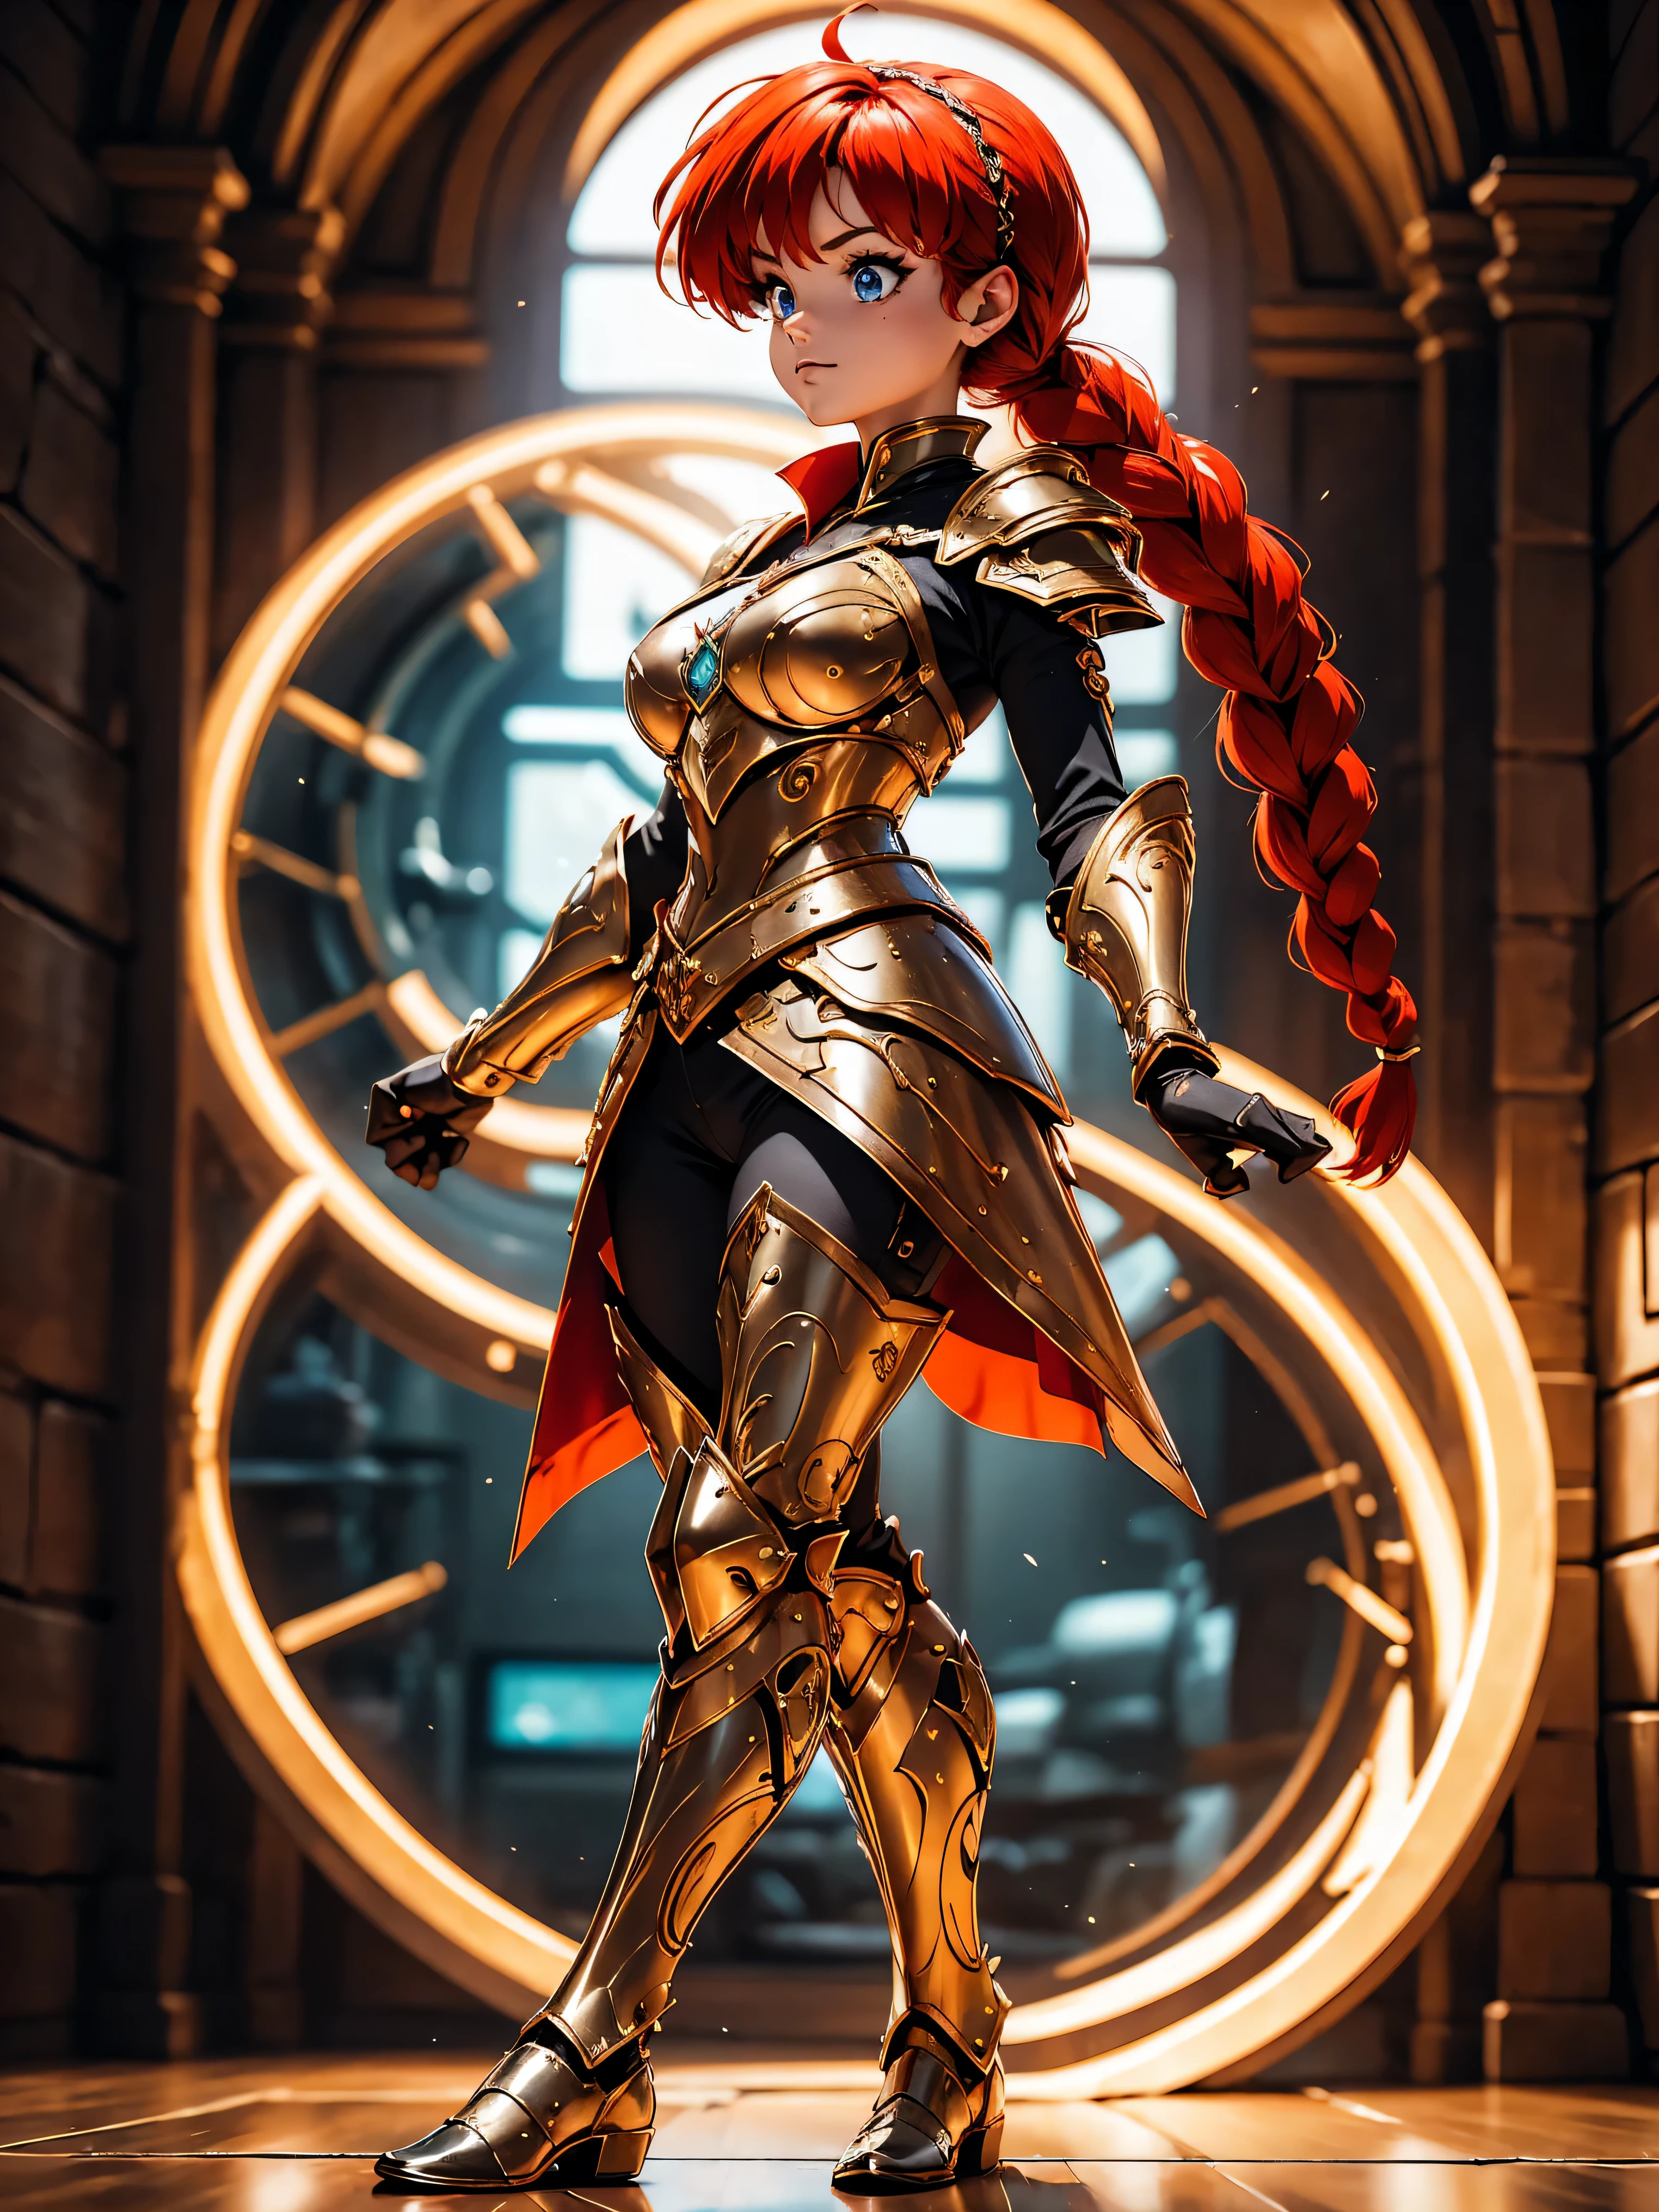 Redhead warrior anime girl, com ears fox, with red armor,  red armored, 15year old, Body cute, breasts big, Combat posture, holding sword, sexy girl, red hair with braid, side hair highlights, locks of hair on the side of the face, beautiful lighting, softshadows, blue colored eyes, pretty legs, short hair with braid, anime styling, ranma chan, Autora Rumiko Takahashi, Based on a work by Rumiko Takahashi, Anime Ranma 1/ 2, sexy warrior, robust hip, fully body, fully body, Bust Big, young girl with fox ears, beautiful and beautiful body, boots on feet, garota 15year old jovem baixa estatura, wearing gothic armor, anime girl, anime styling, feet with black boots, front view angle, plein-air, red hair braid, ears fox, upright posture, body in straight posture, eyes large, red armor